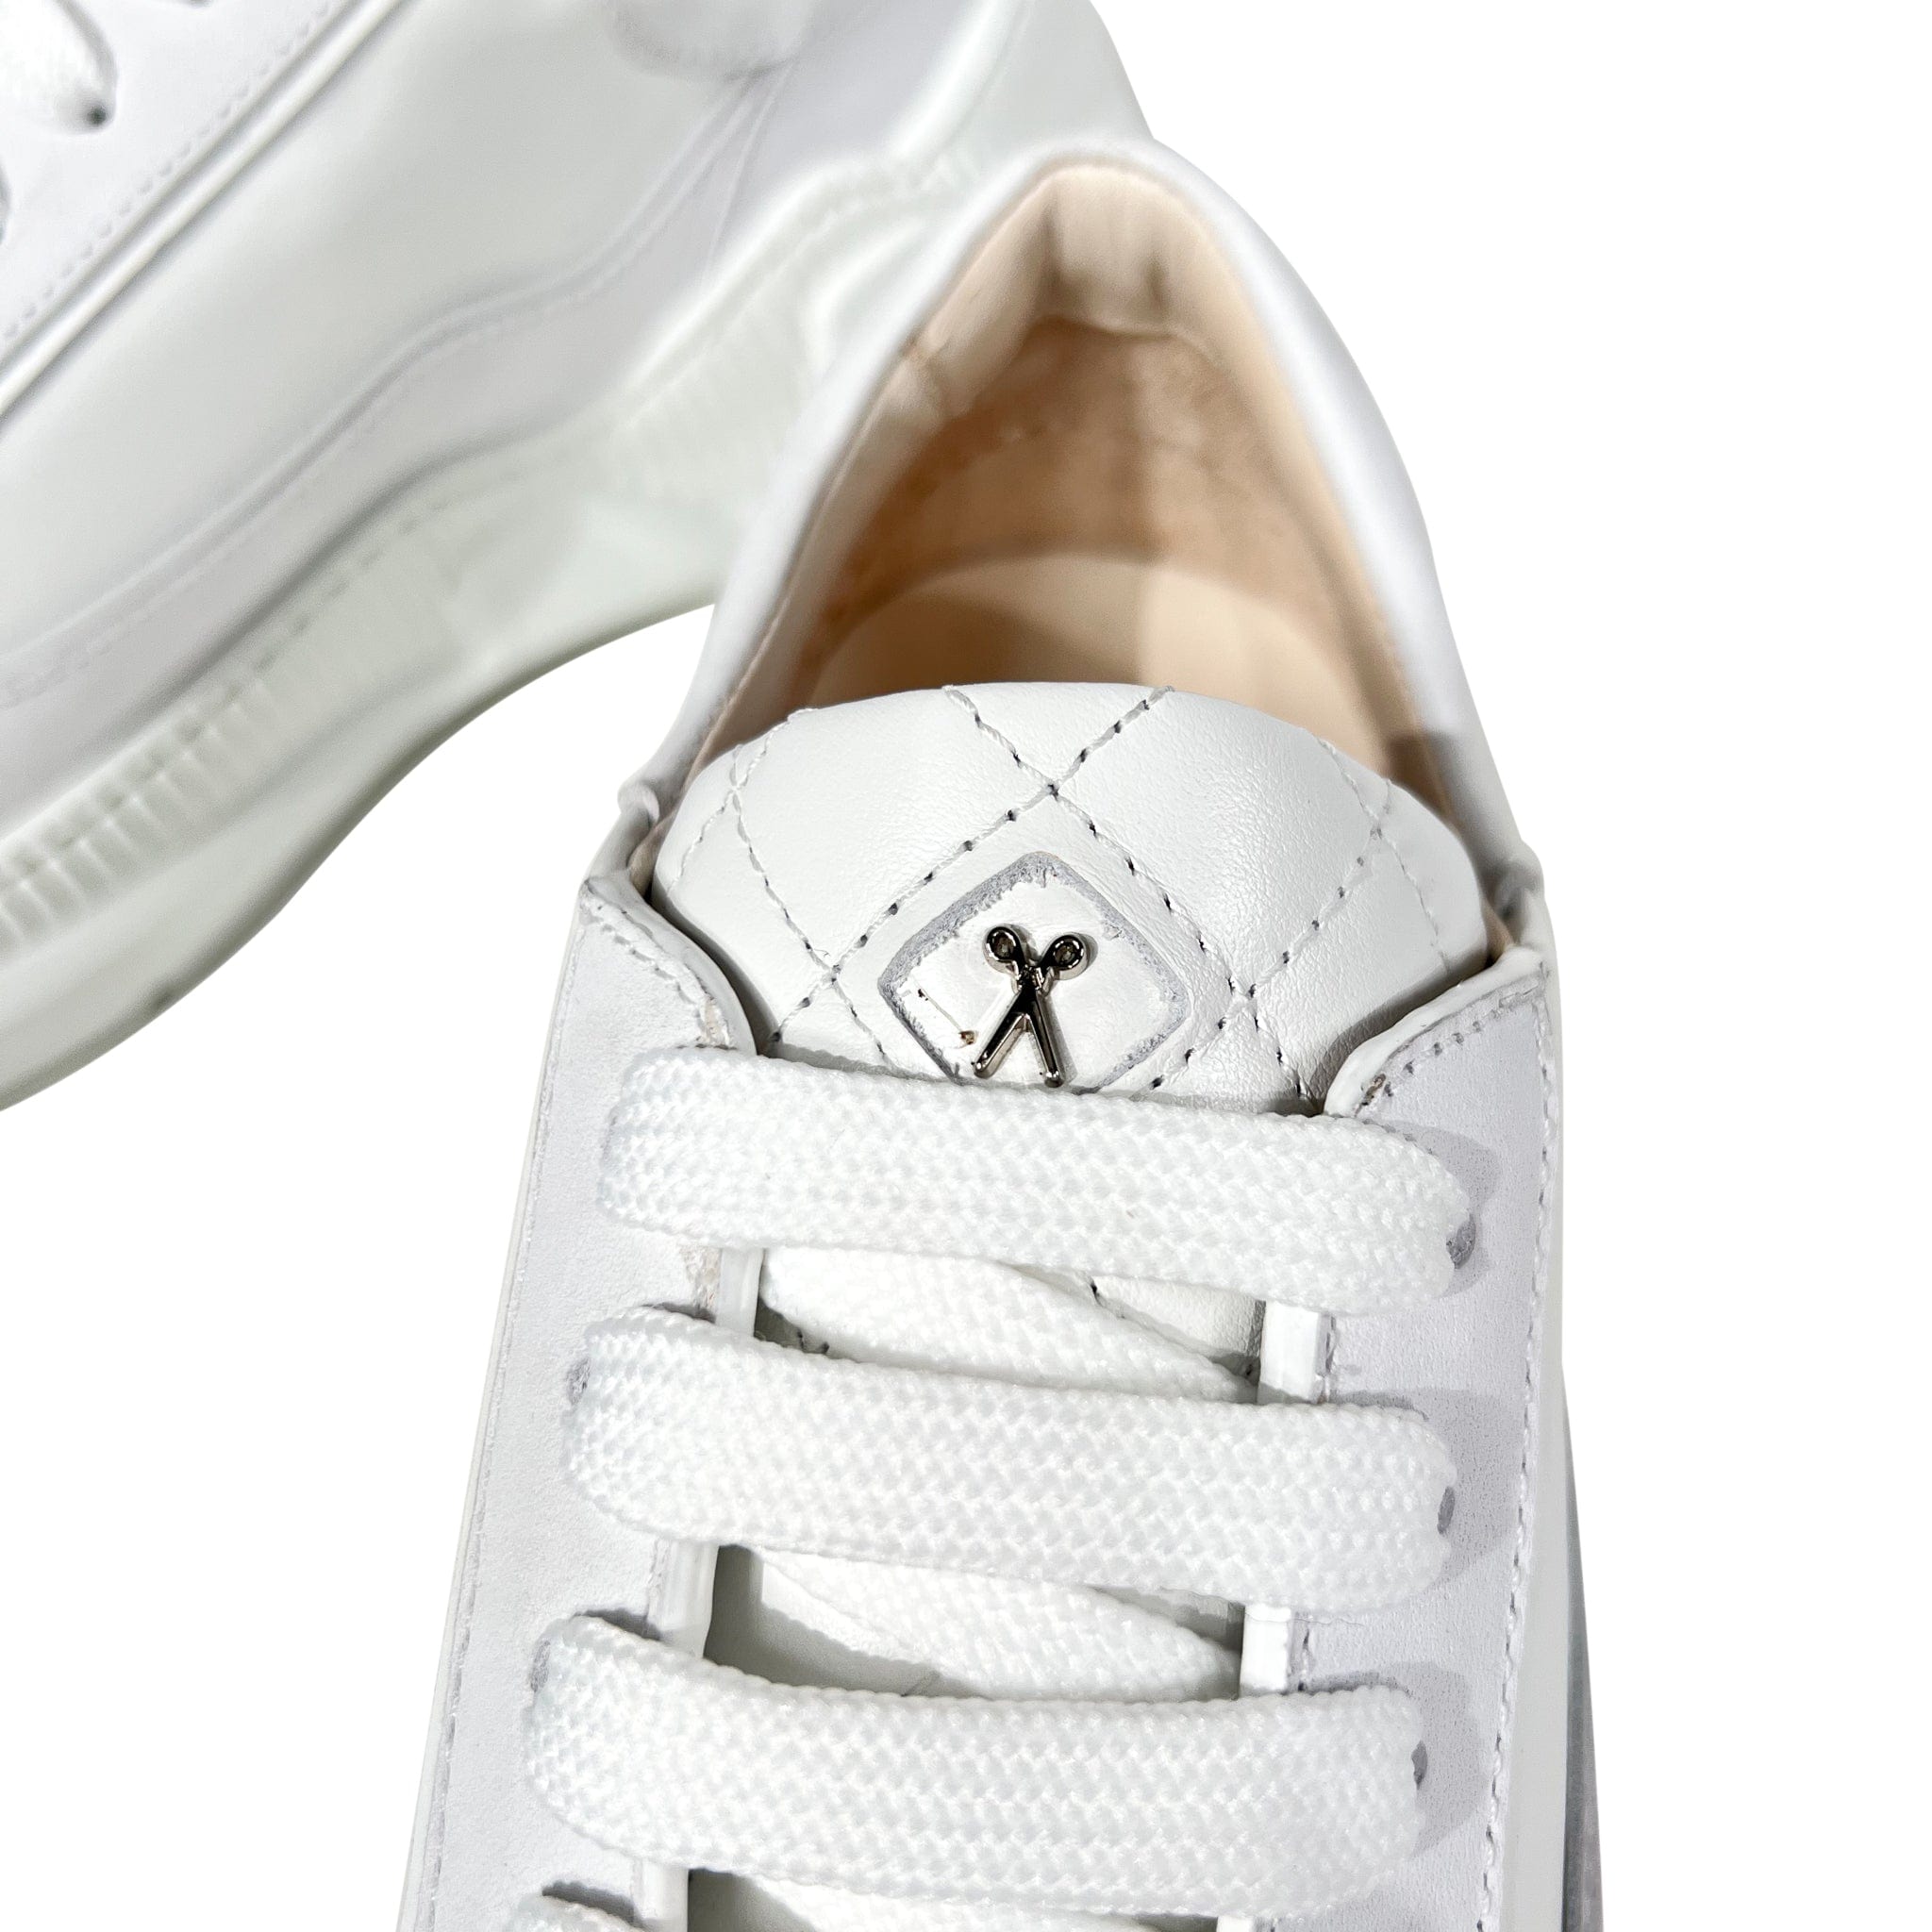 Nesto Low Top Italian Leather Sneaker | All White | Made in Italy